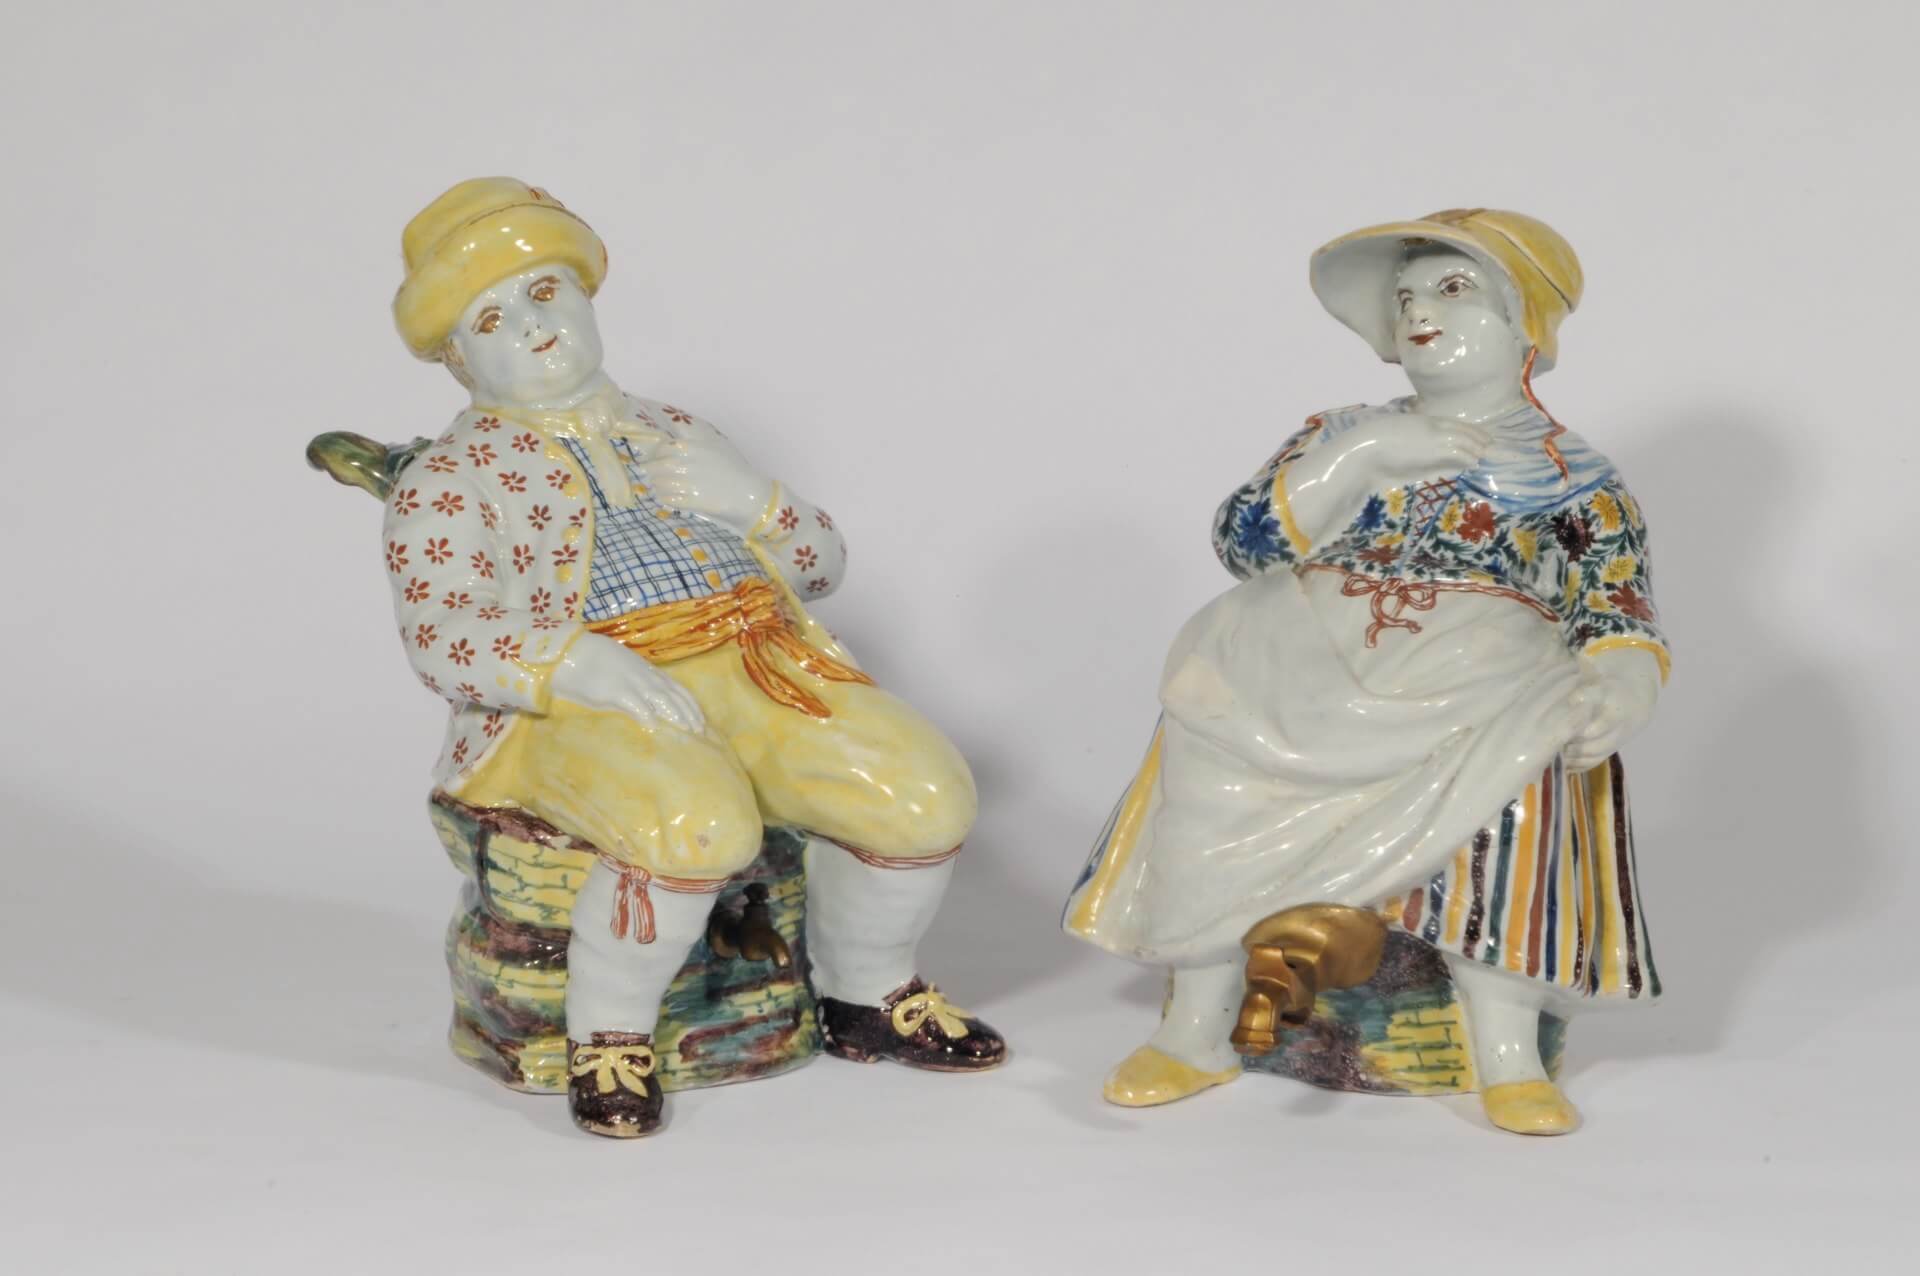 Antique Delft pottery duo of polychrome man and woman